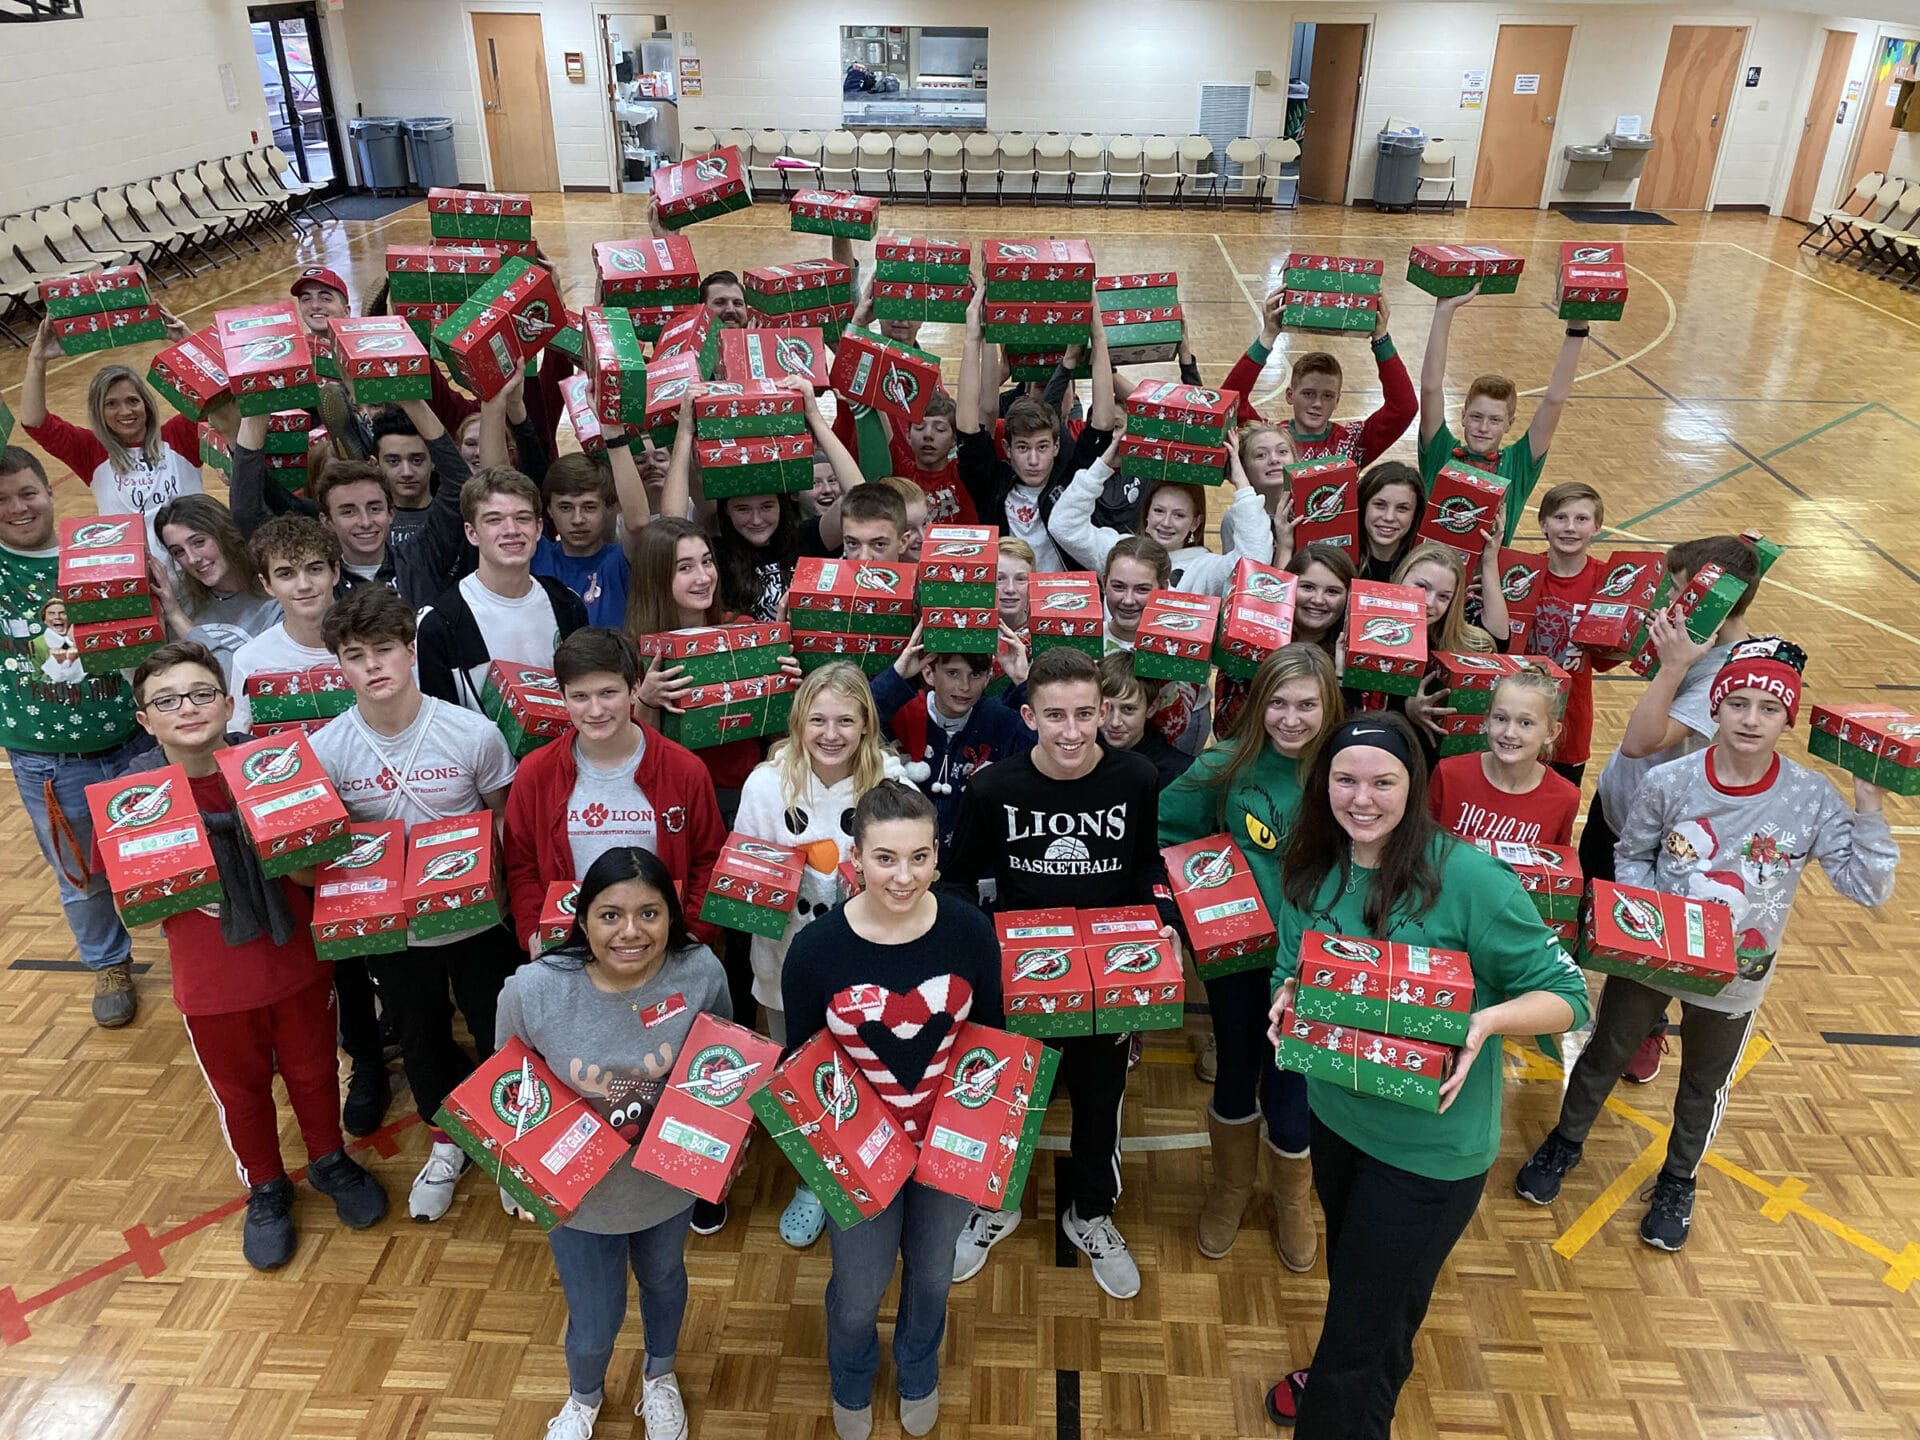 Students from Cornerstone Christian Academy (CCA) participate in the school’s packing party by assembling shoeboxes for Operation Christmas Child.